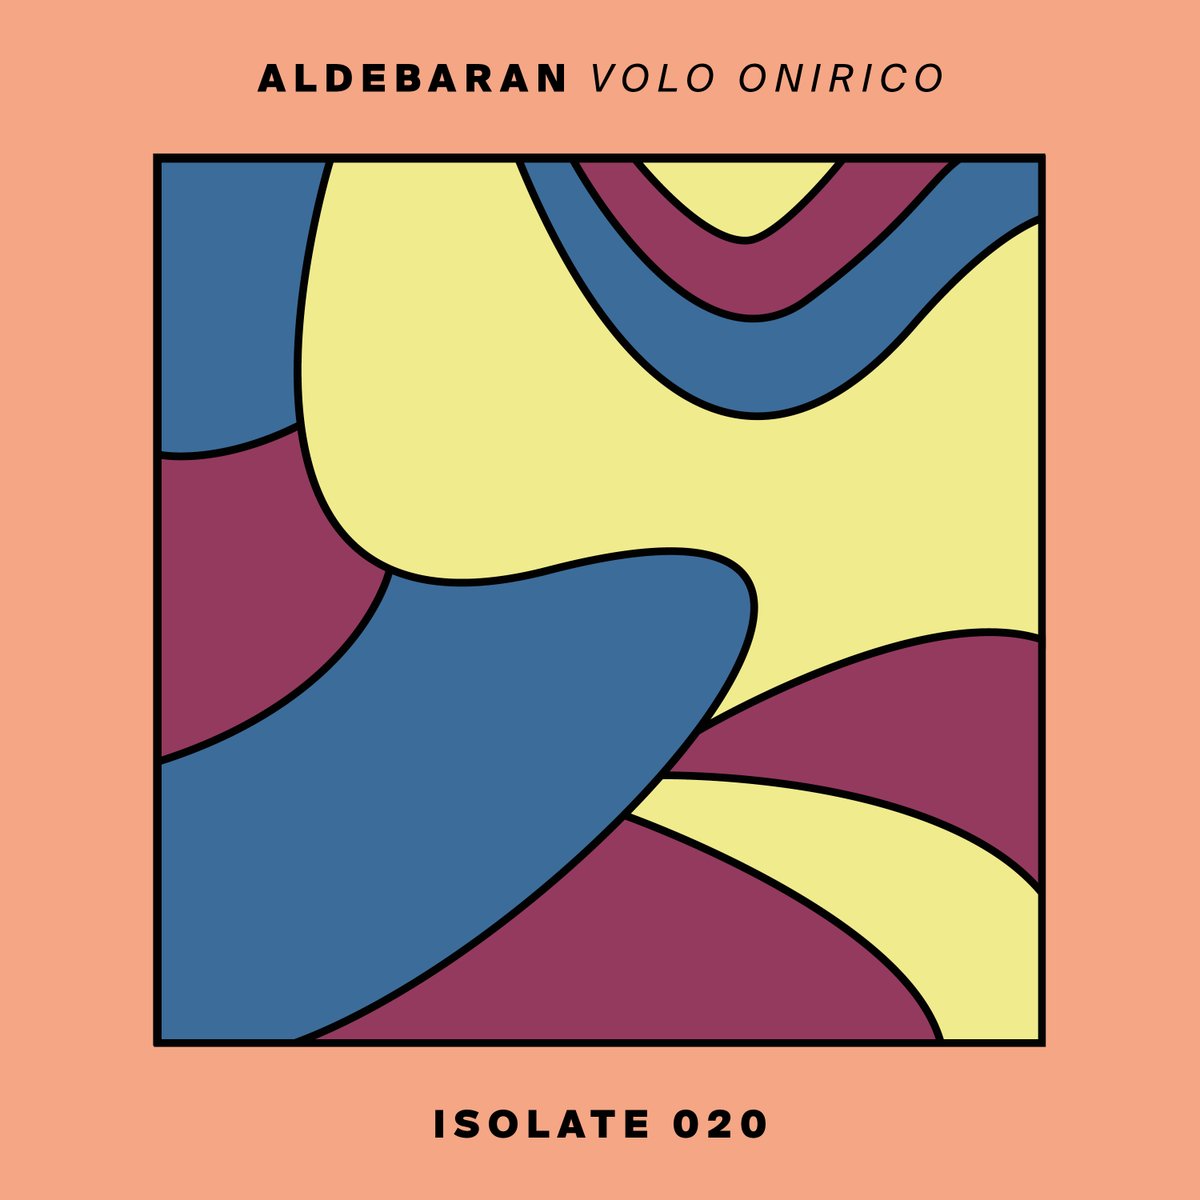 Here we are taking on an epic voyage into the stars with ISO020 before the year 2021 ends. ‘Volo Onirico’ EP is available for pre-order on Beatport and Spotify-only version of “Ram” is available for stream. Listen & Pre-order: fanlink.to/ISO020_Aldebar…